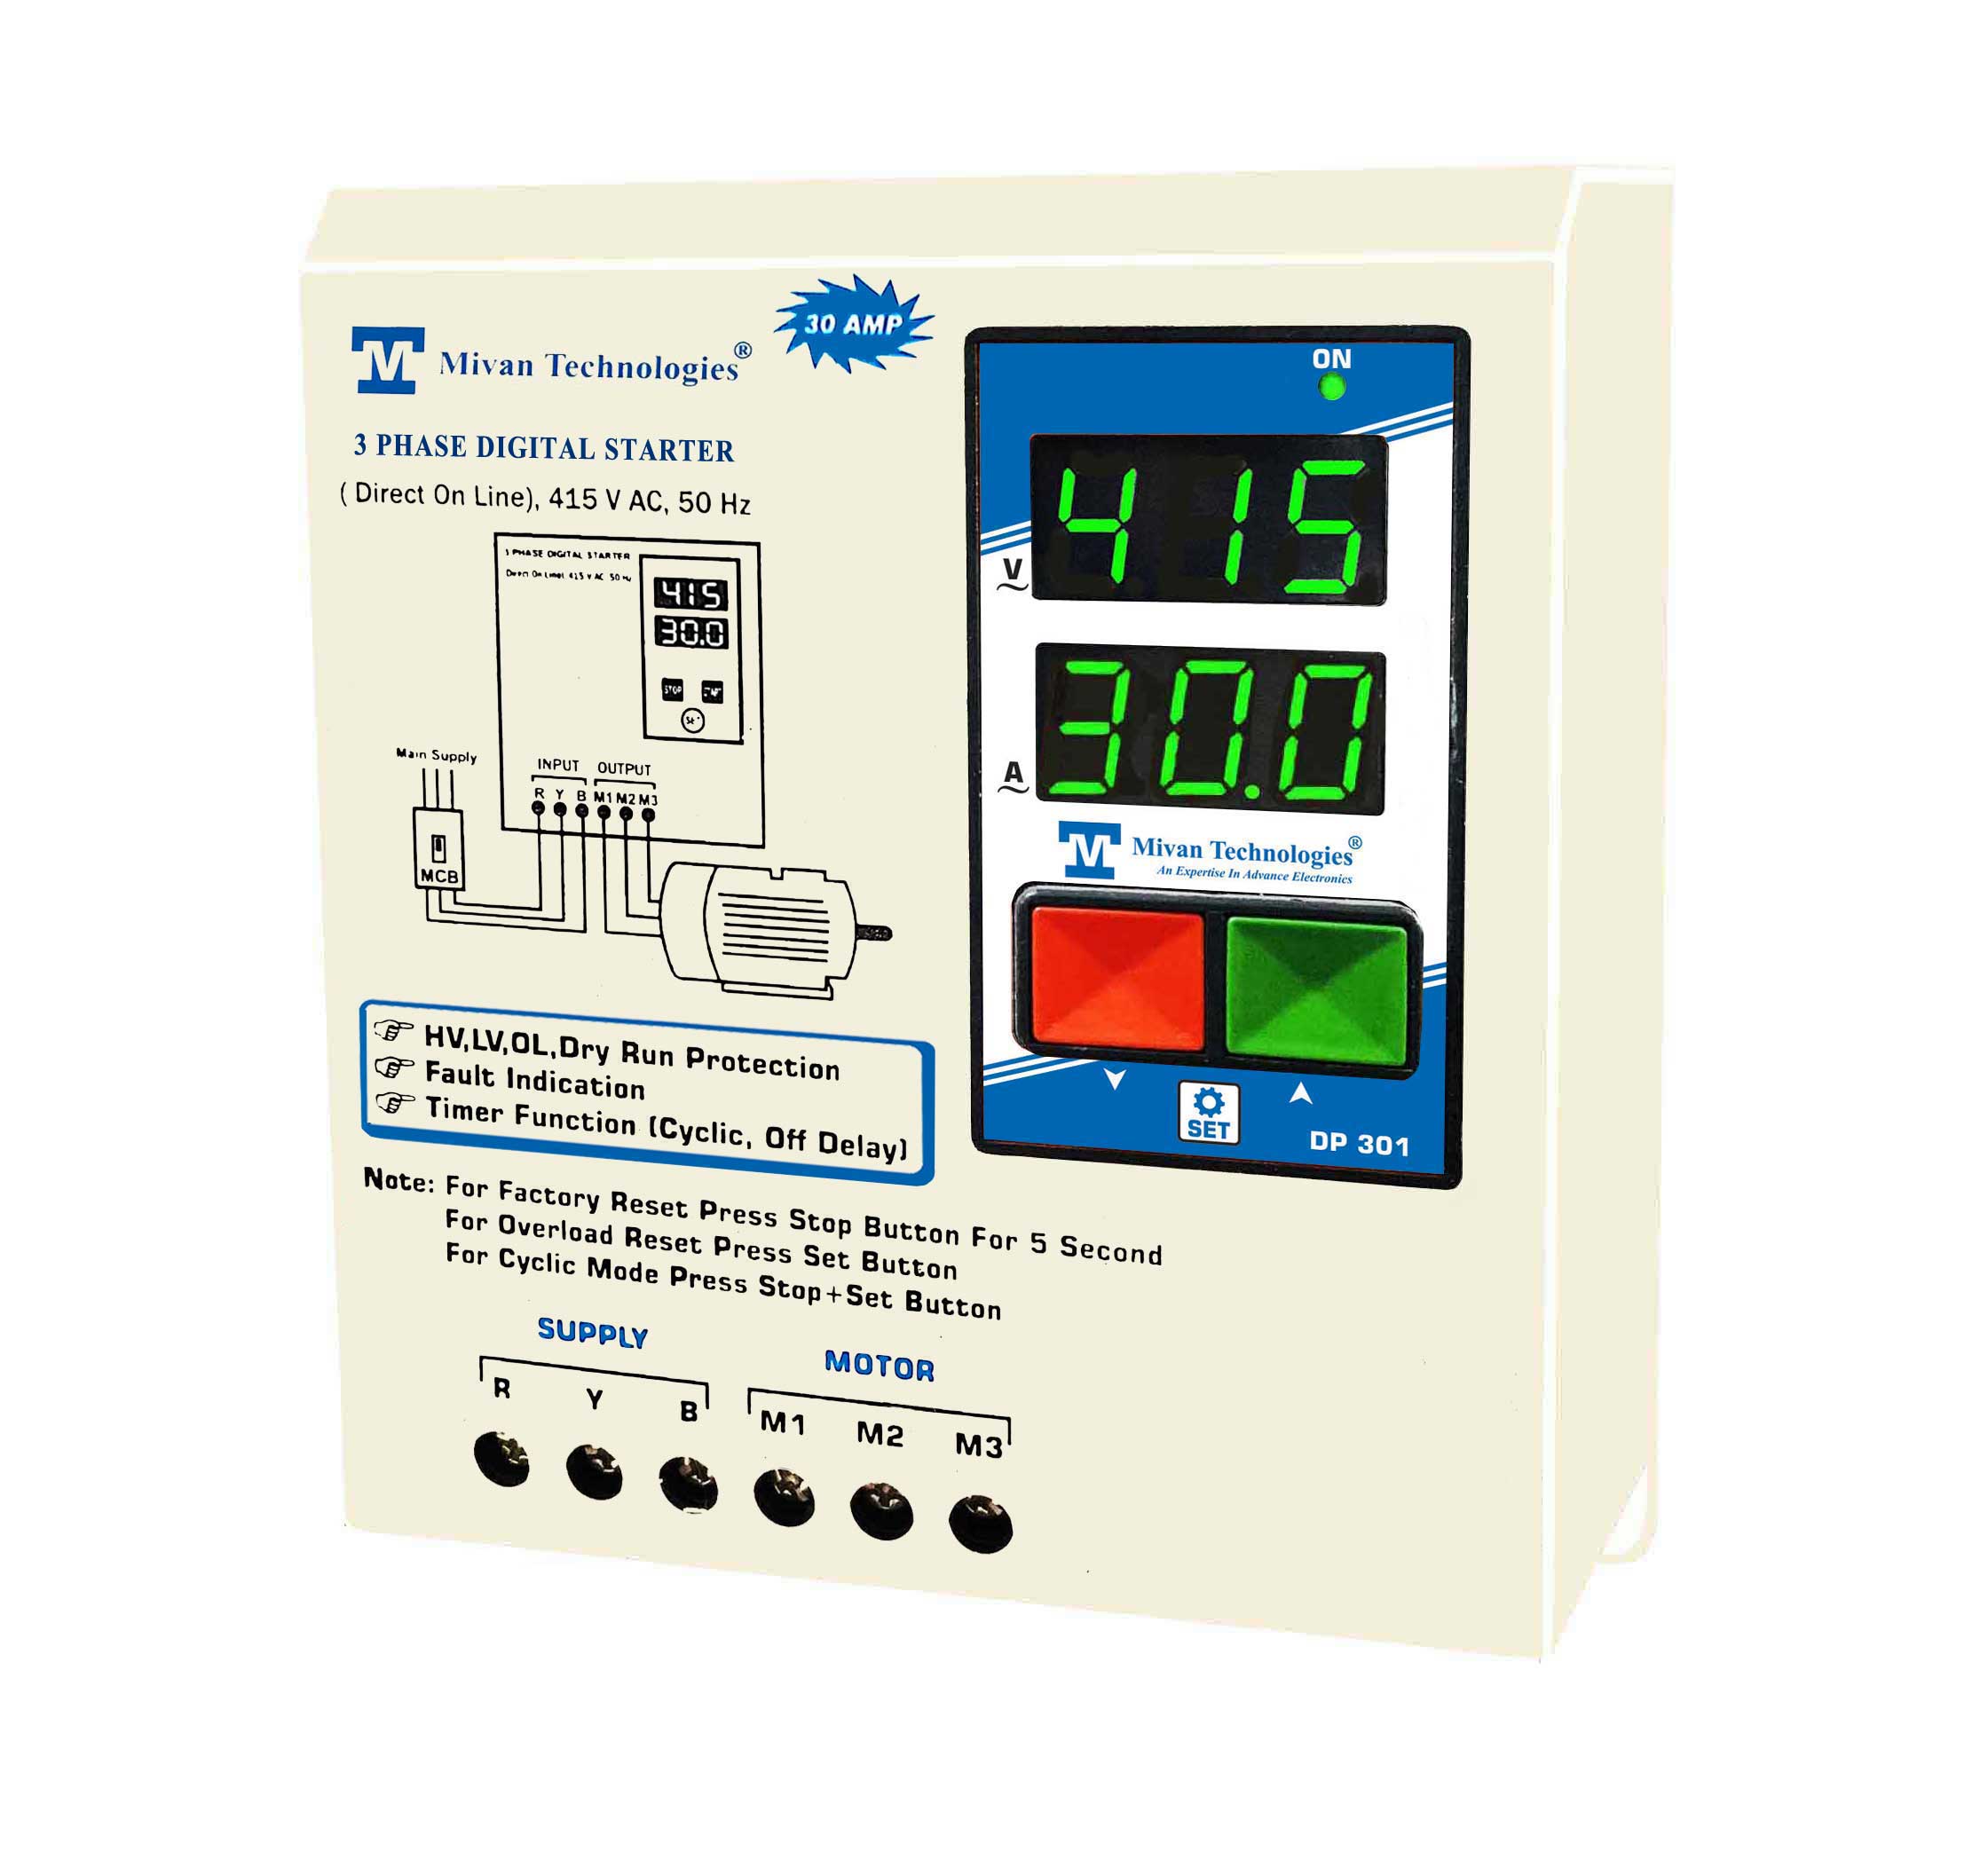 3 Phase DOL Digital Starter for 3 Phase Motor Suitable up to 10 hp Motor with HV LV OL Dry protections with cyclic timer DP301S